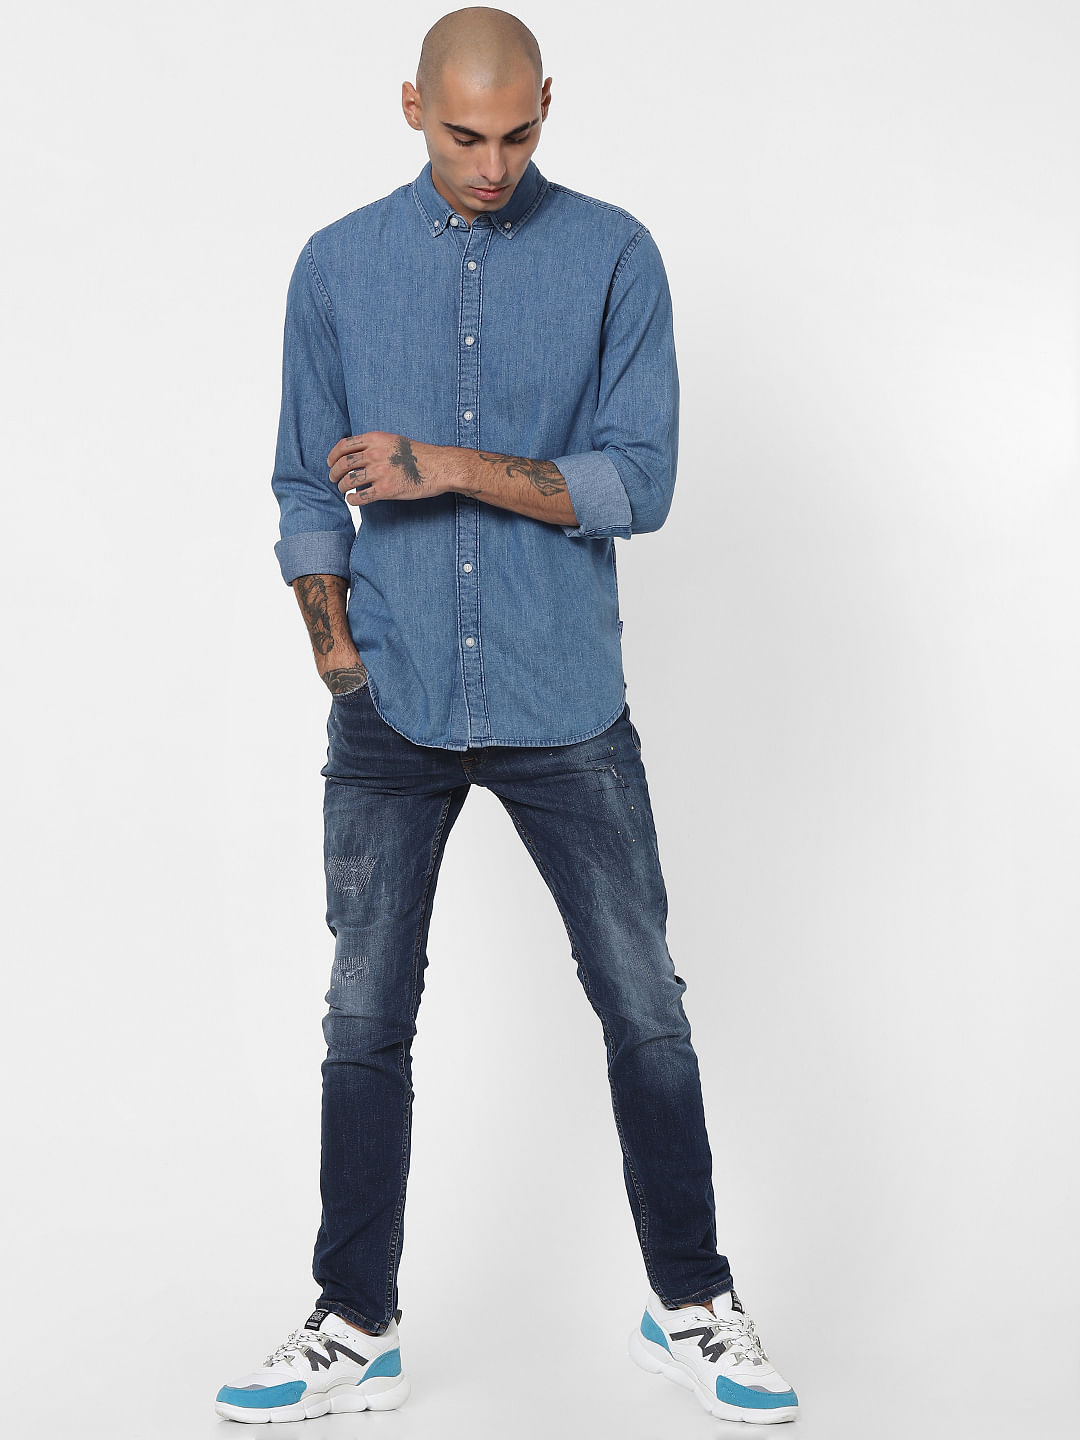 United Colors Of Benetton Denim Jeans Shirts - Buy United Colors Of  Benetton Denim Jeans Shirts online in India